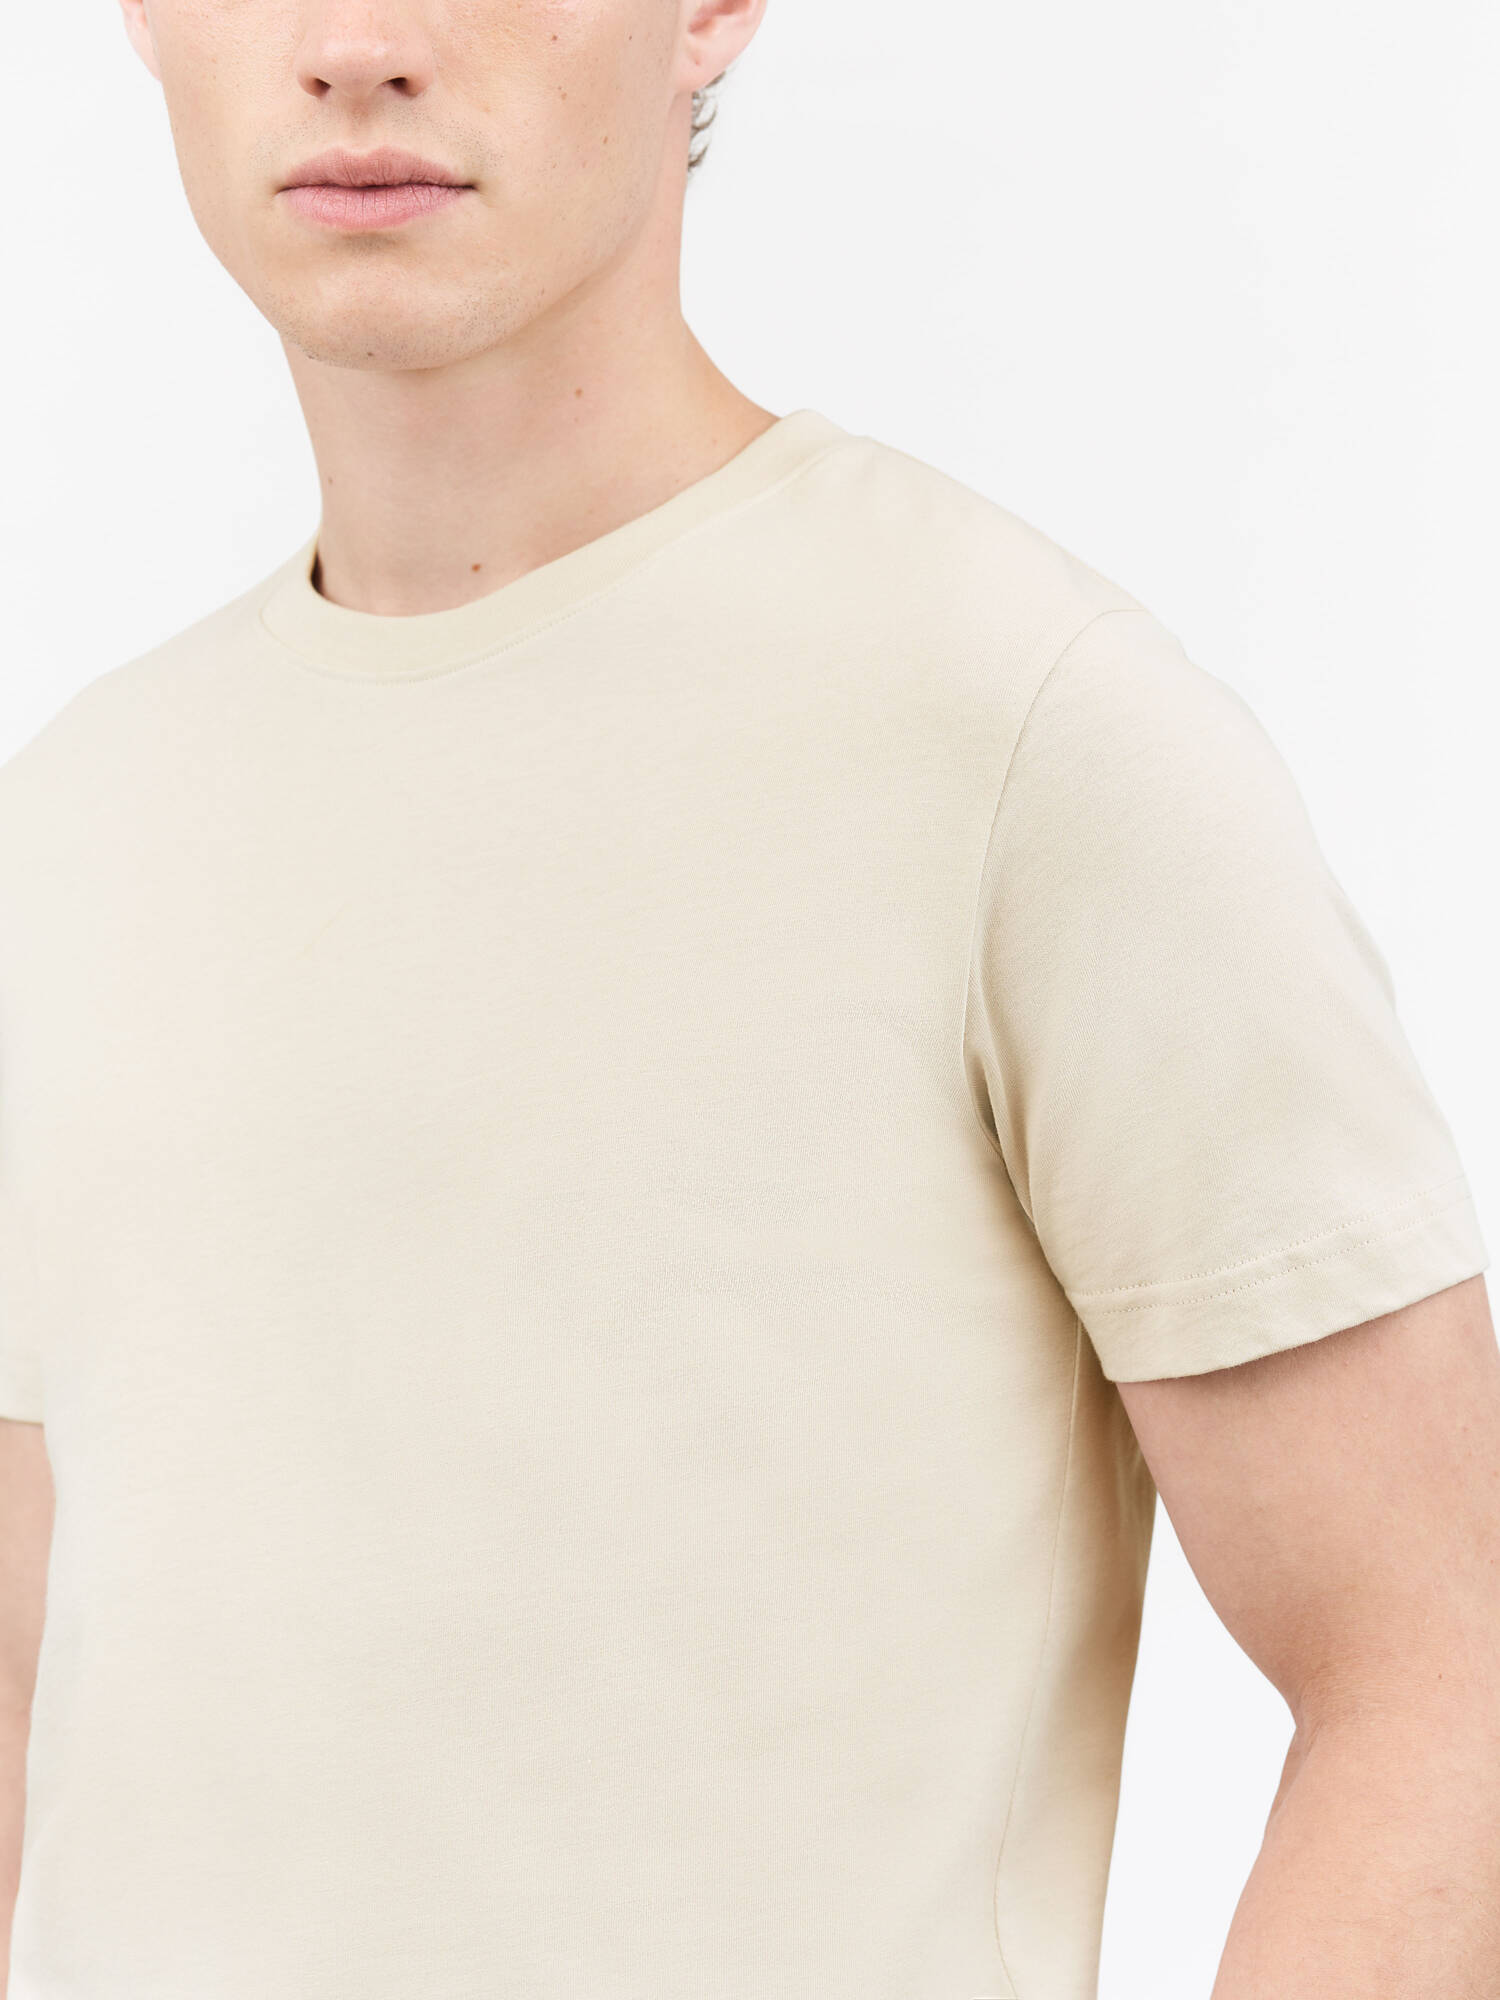 TIGER OF SWEDEN Dillan T-Shirt in Beige T71996003 | Shop from eightywingold an official brand partner for Tiger of Sweden Canada and US.